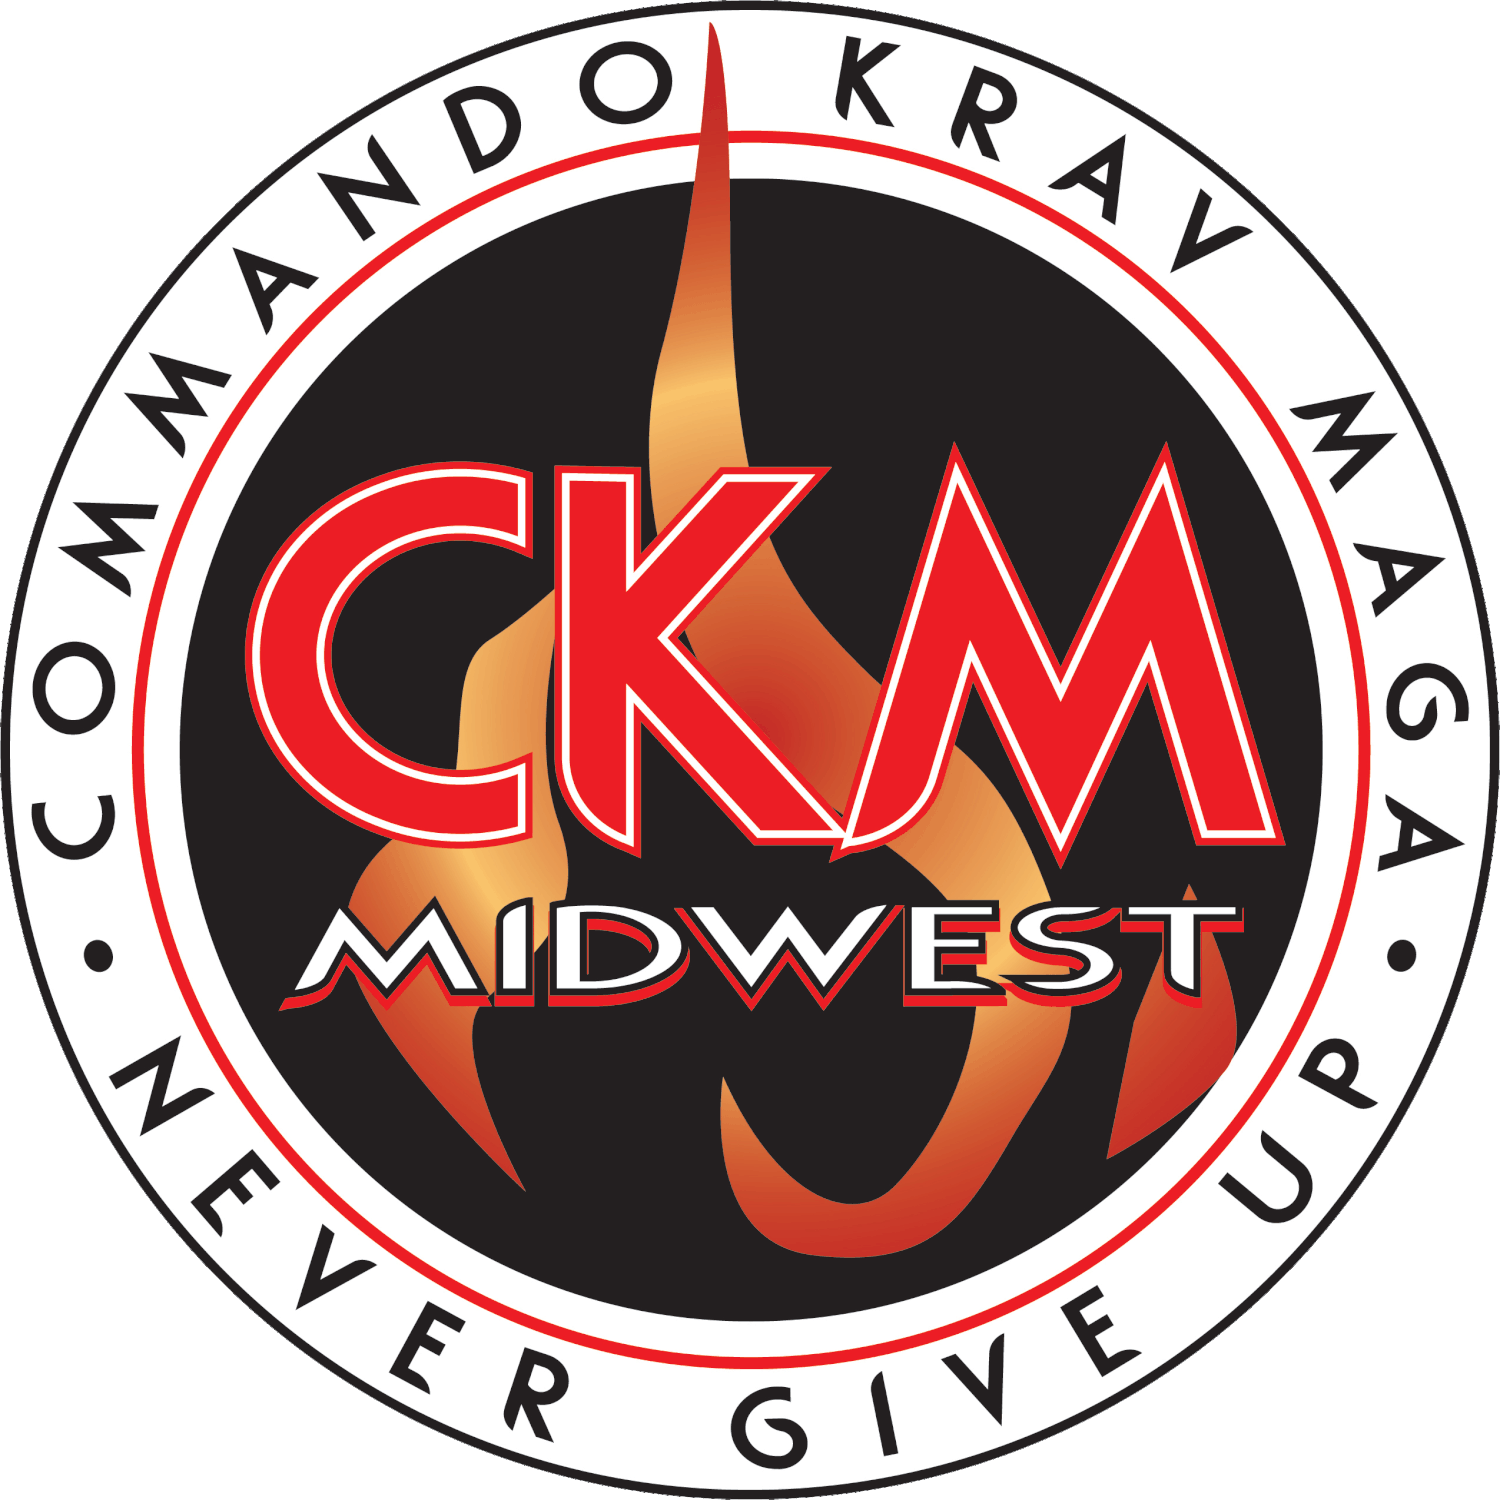 CKM Midwest